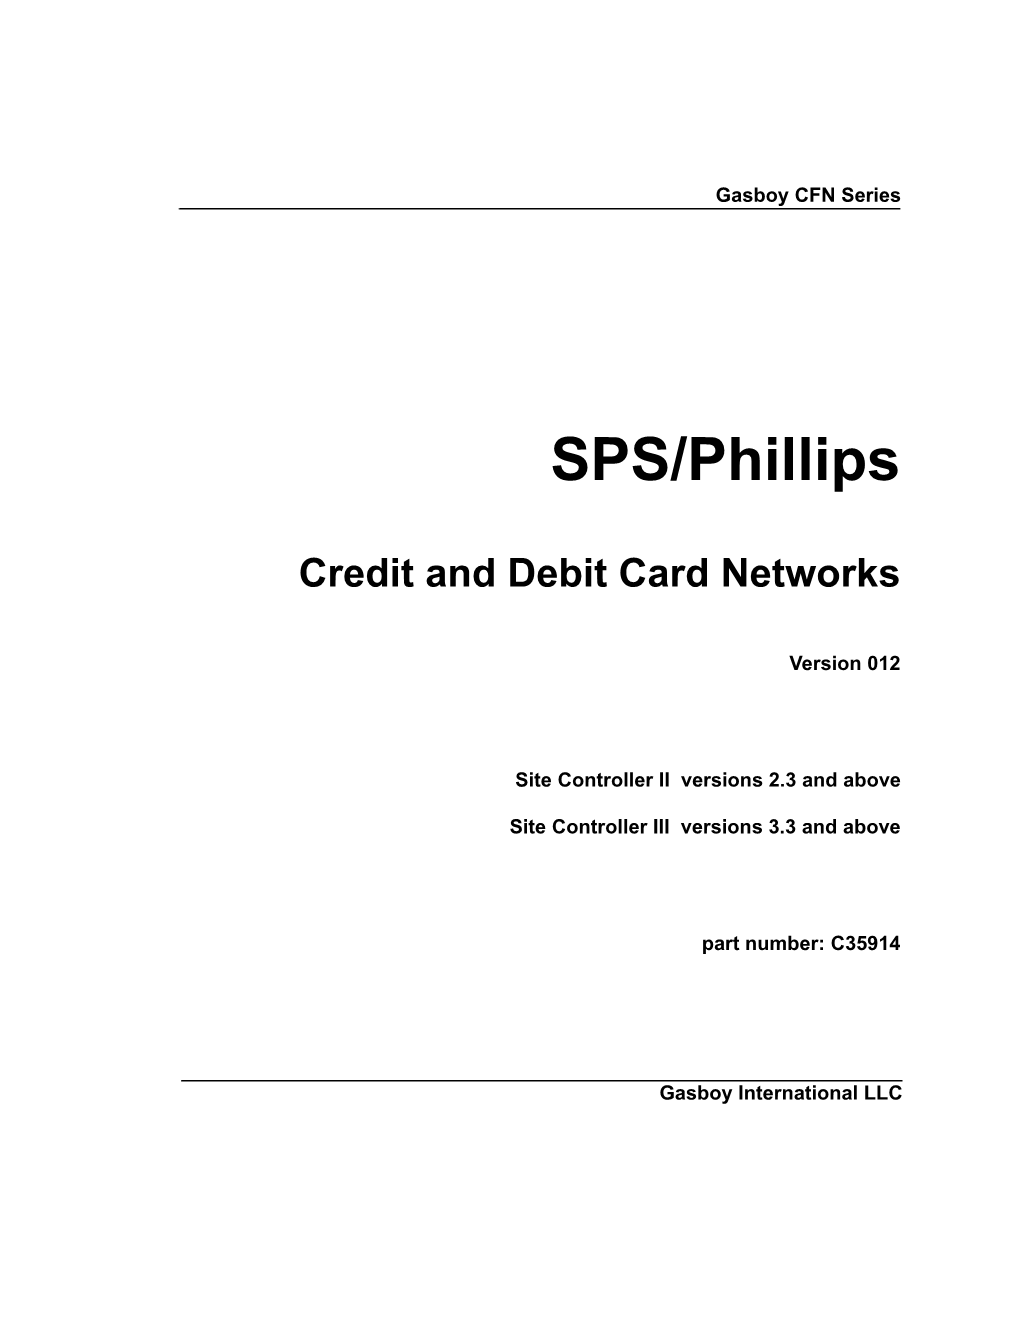 SPS/Phillips Credit and Debit Card Networks